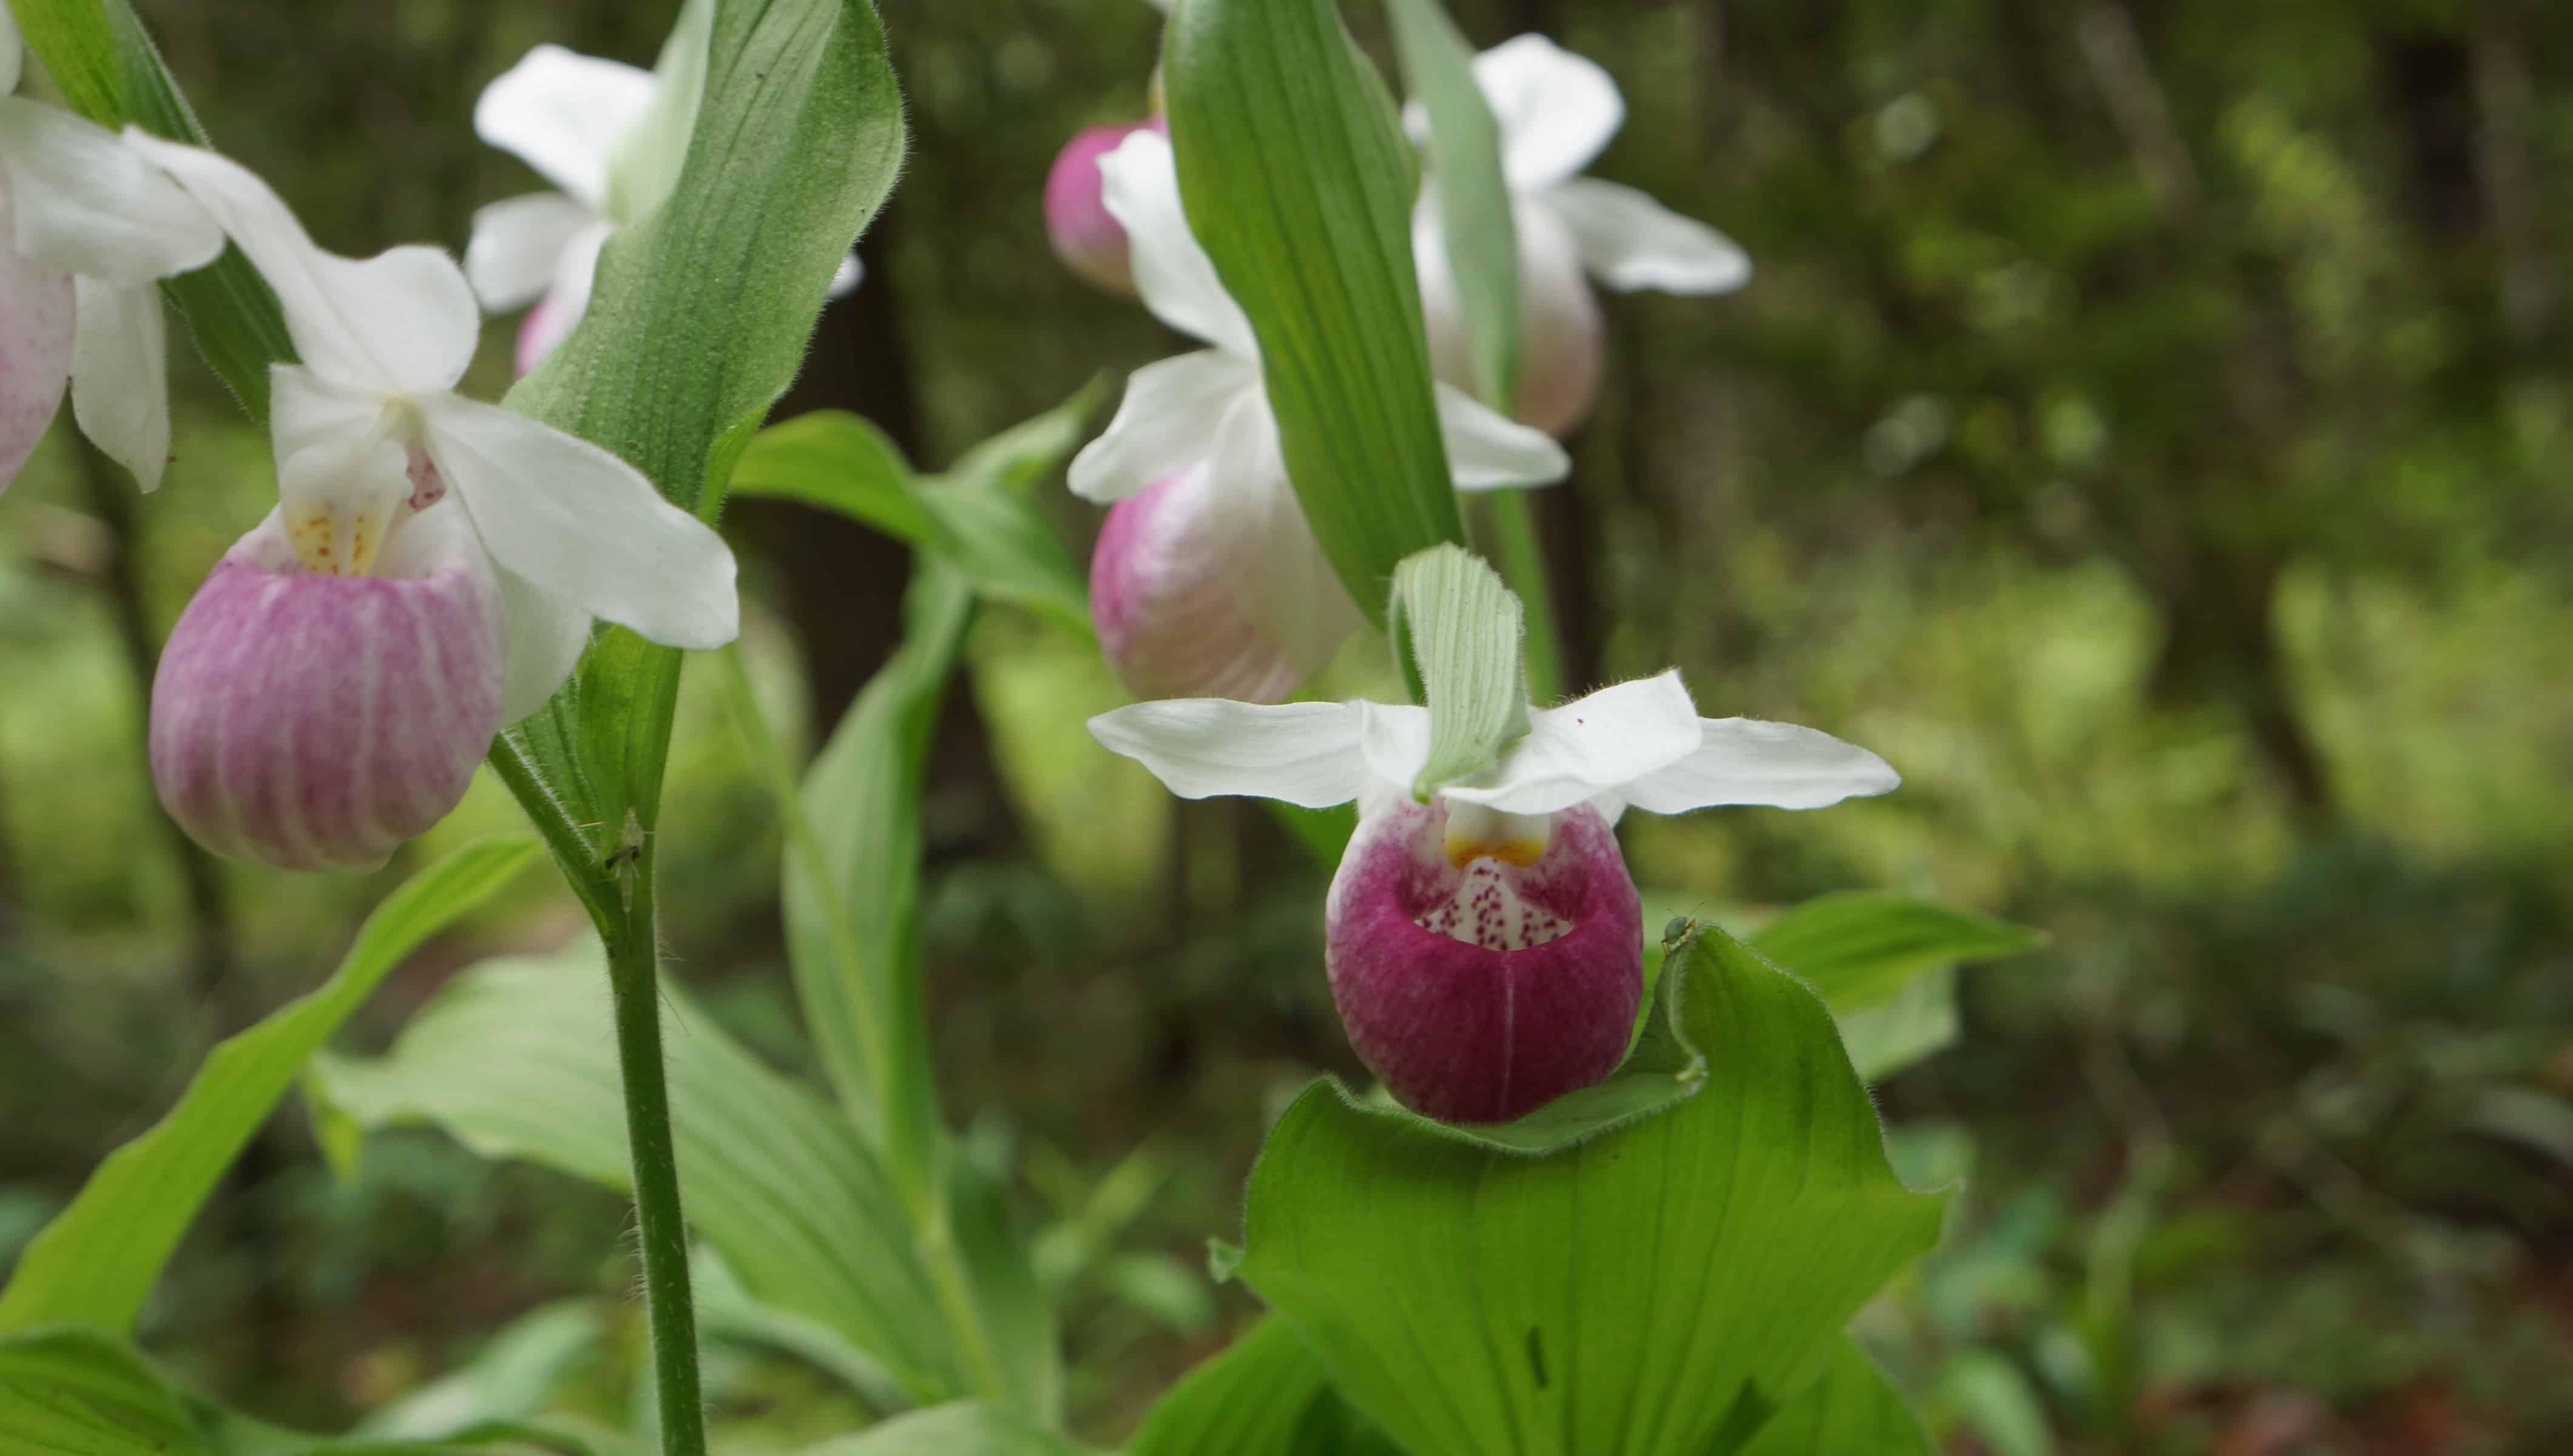 Lady Slippers are one of the few pieces of nature that you'll find along the Quaking Bog Loop.